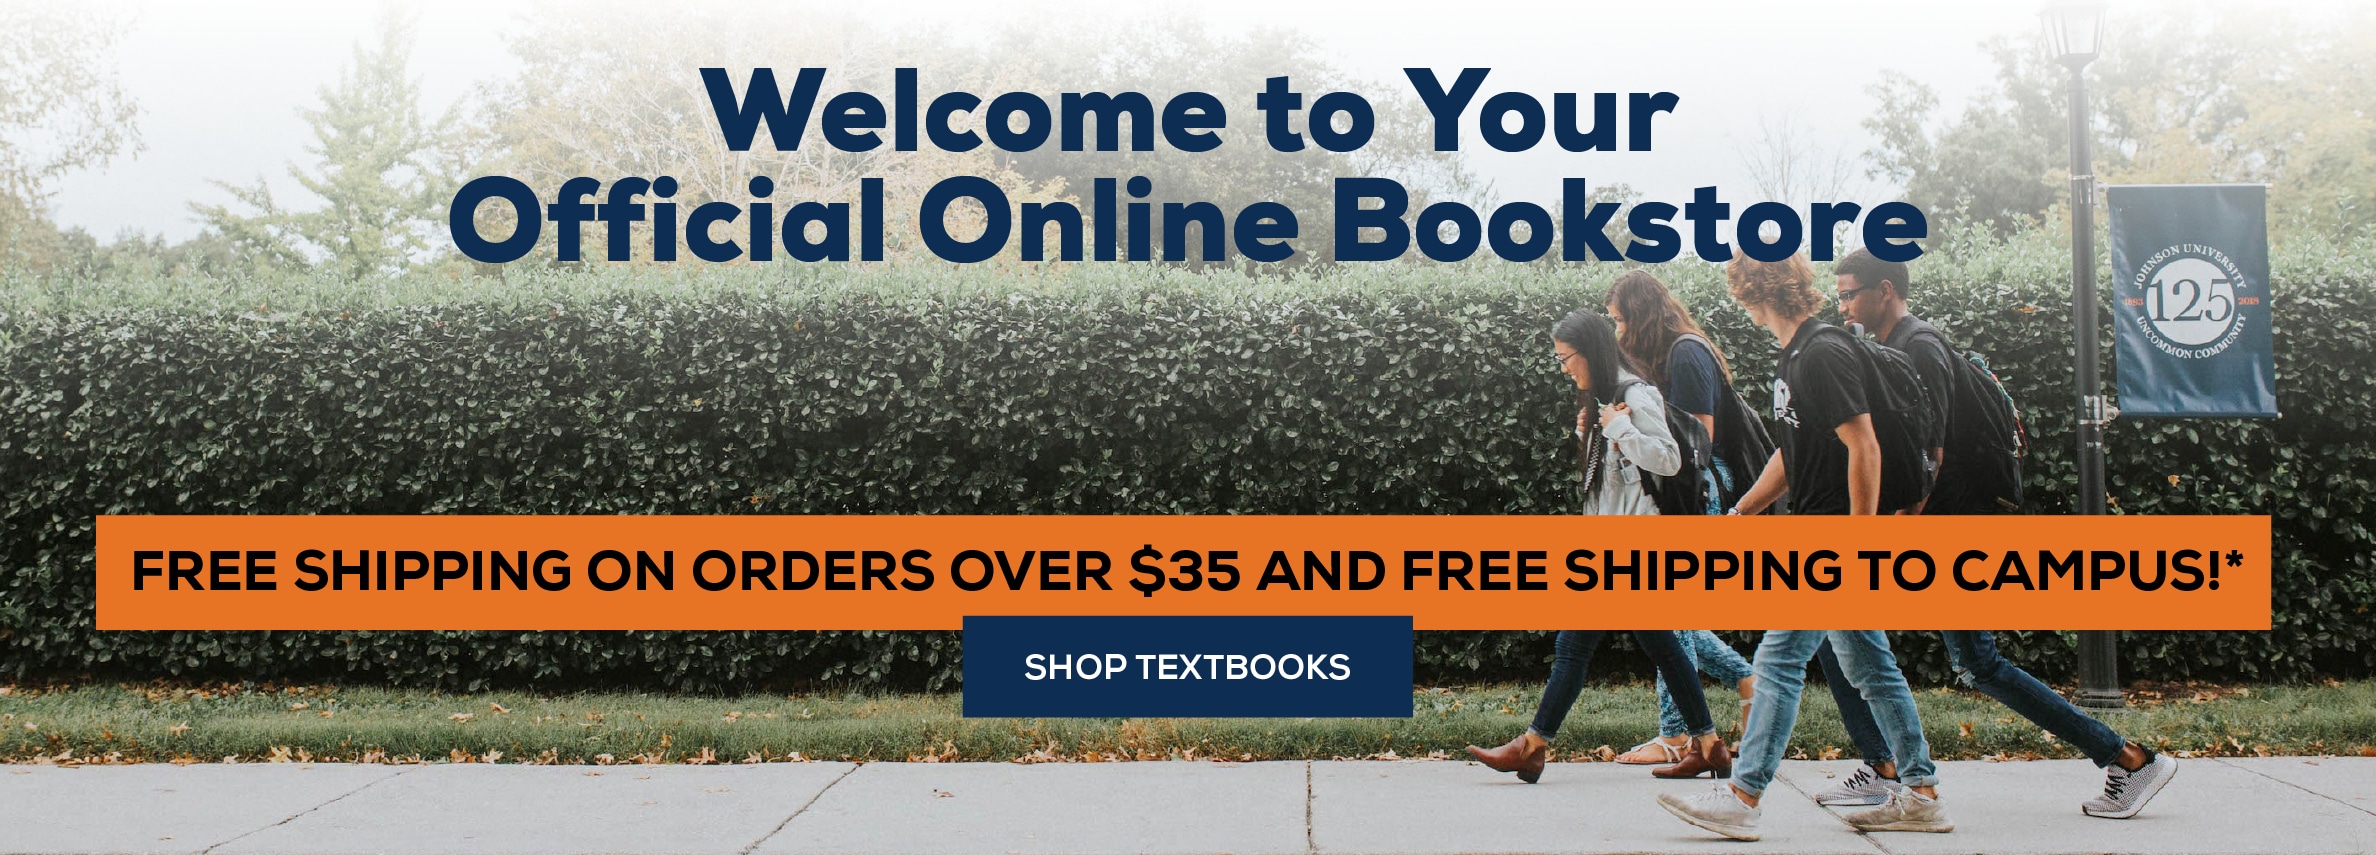 Welcome to your official online bookstore. Free shipping on orders over $35 and free shipping to Campus!* shop textbooks.